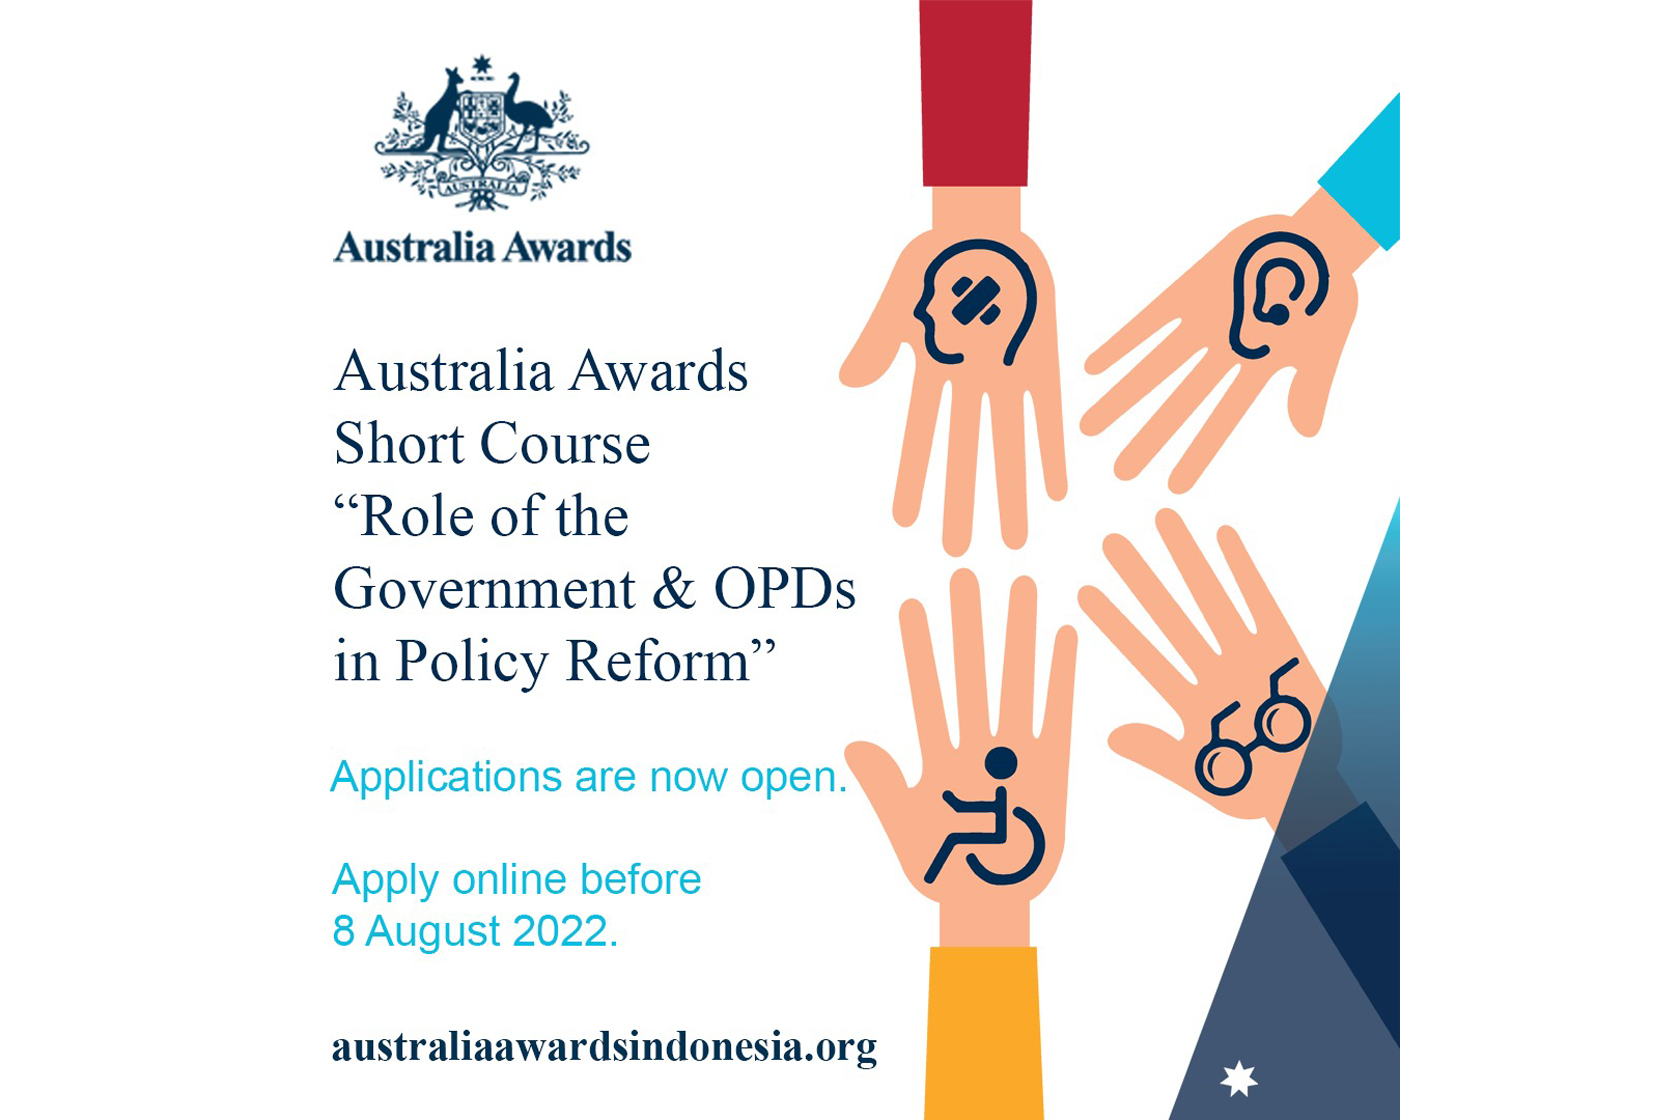 Applications Open for the Australia Awards Short Course on Role of Government and OPDs in the Implementation of Policy Reform for Inclusive Development